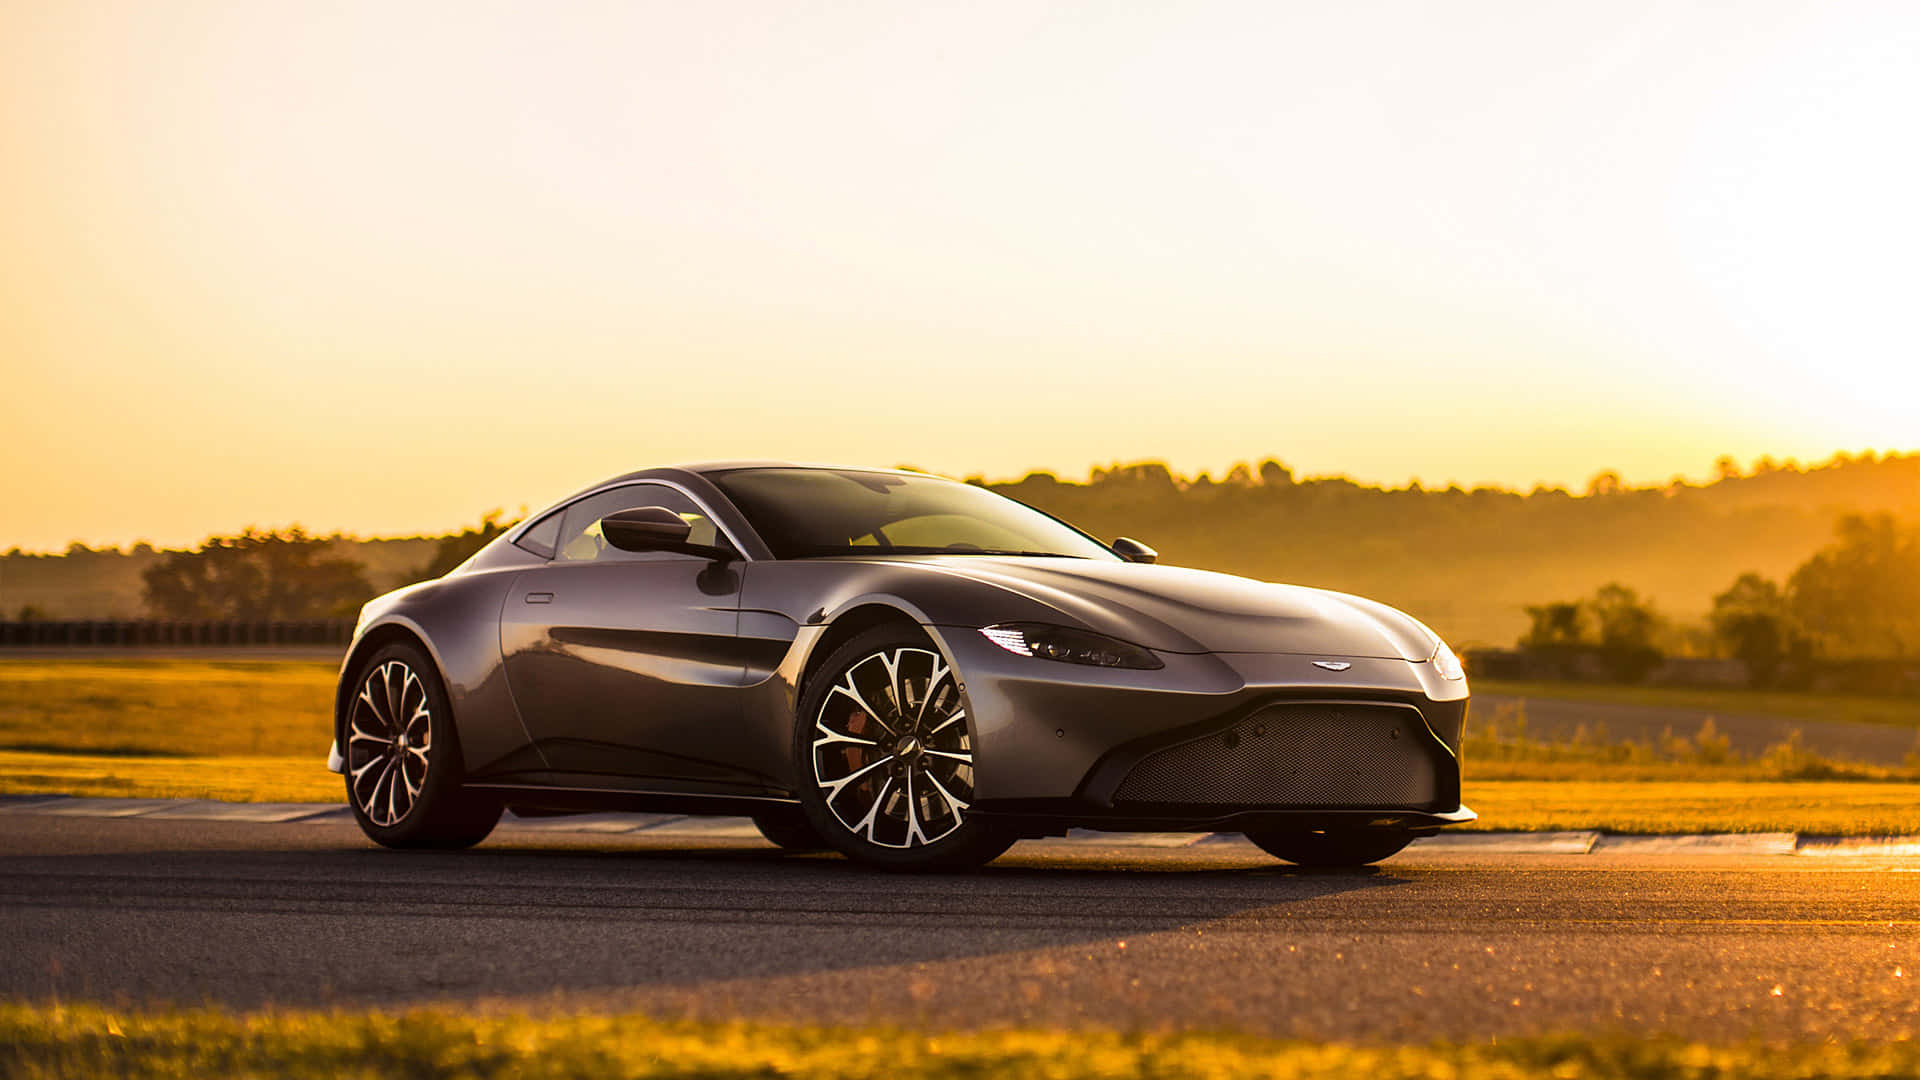 Aston Martin Vantage: The Epitome of Luxury and Performance Wallpaper